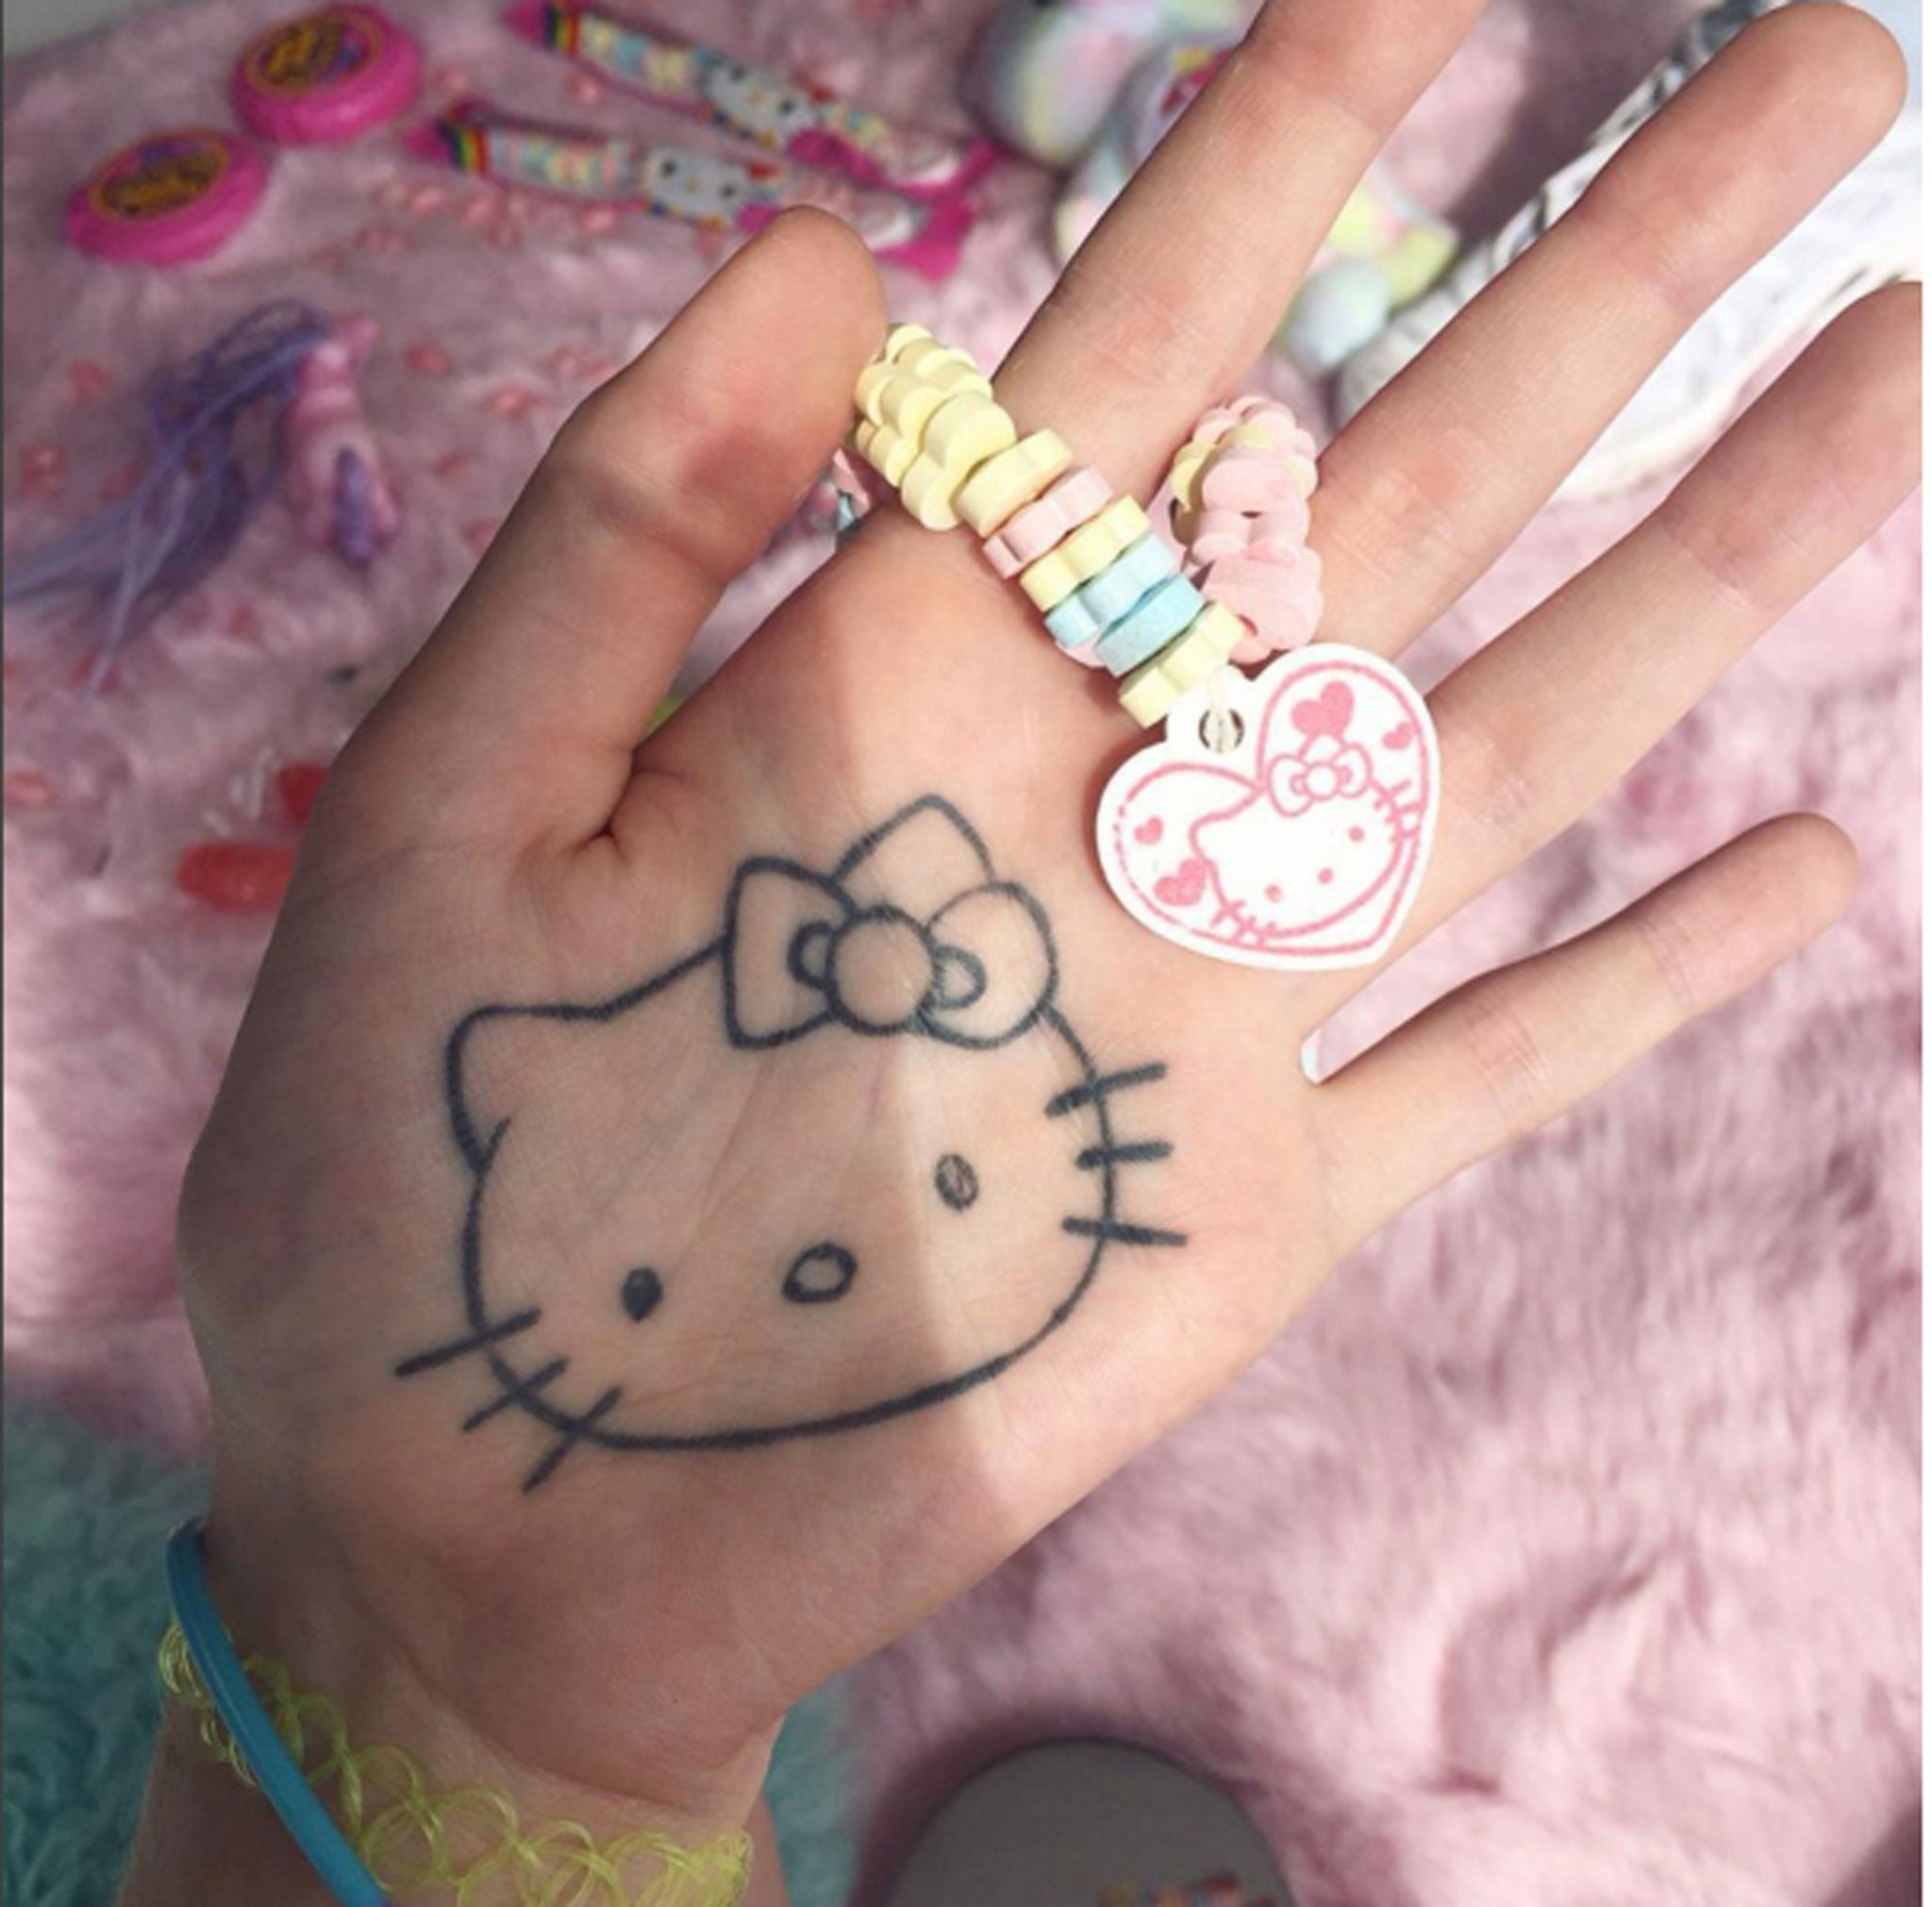 Barker says: ‘I wanted to get a tattoo on the palm of my hand and because it was painful I was like, 'what do I believe in enough to get tattooed on my hand for the rest of my life?', and I was like – Hello Kitty’